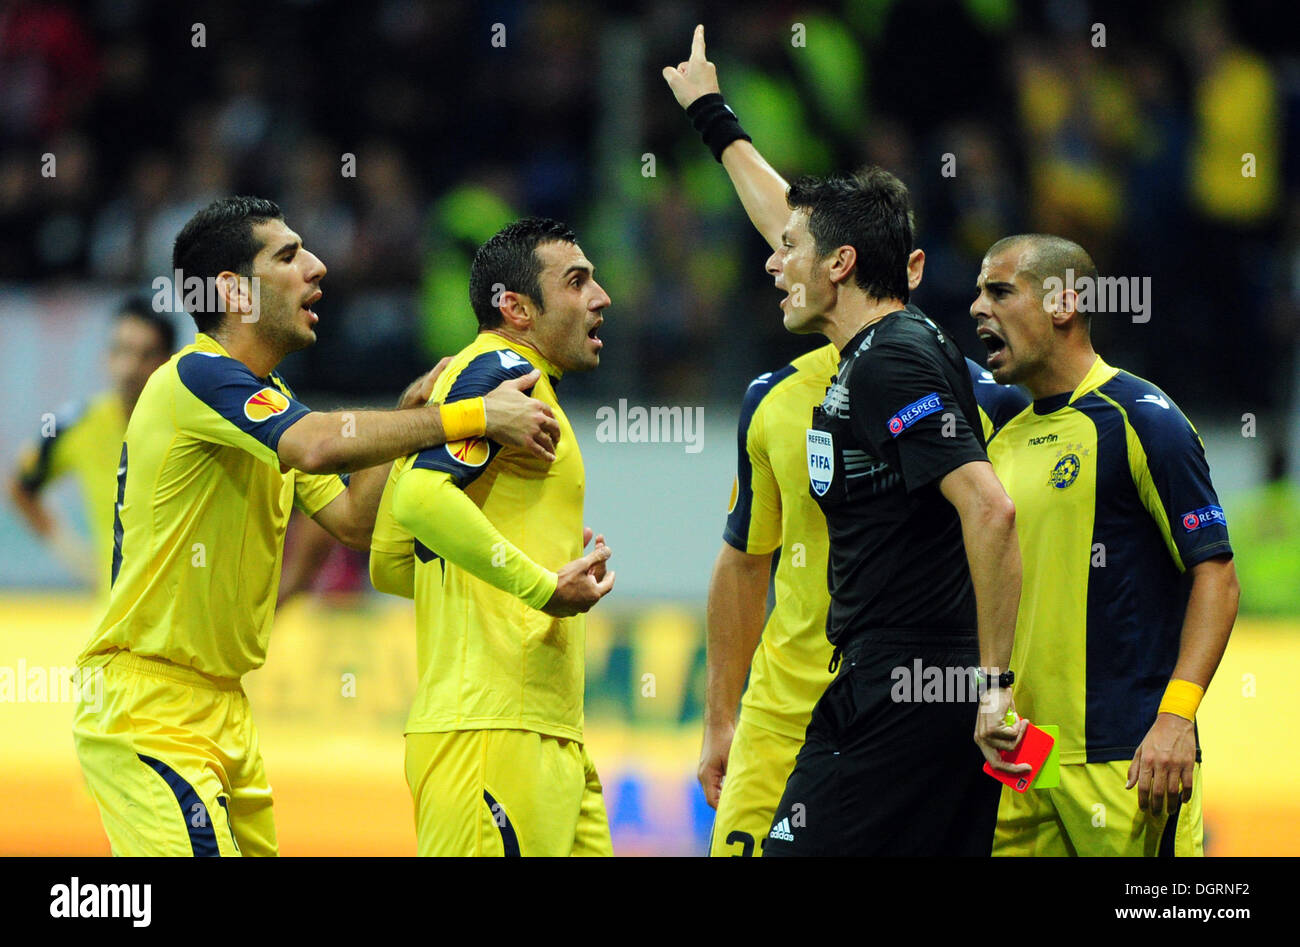 Frankfurt Main, Germany. 24th Oct, 2013. Tel Aviv's Eytan Tibi (L-R) and Nikola Mitrovic yell at referee Antonio Damato after he issues a yellow-red card to Tal Ben Haim (R) during the Europa League Group F match between Eintracht Frankfurt and Maccabi Tel Aviv at Frankfurt Stadium in Frankfurt Main, Germany, 24 October 2013. Photo: DANIEL REINHARDT/dpa/Alamy Live News Stock Photo